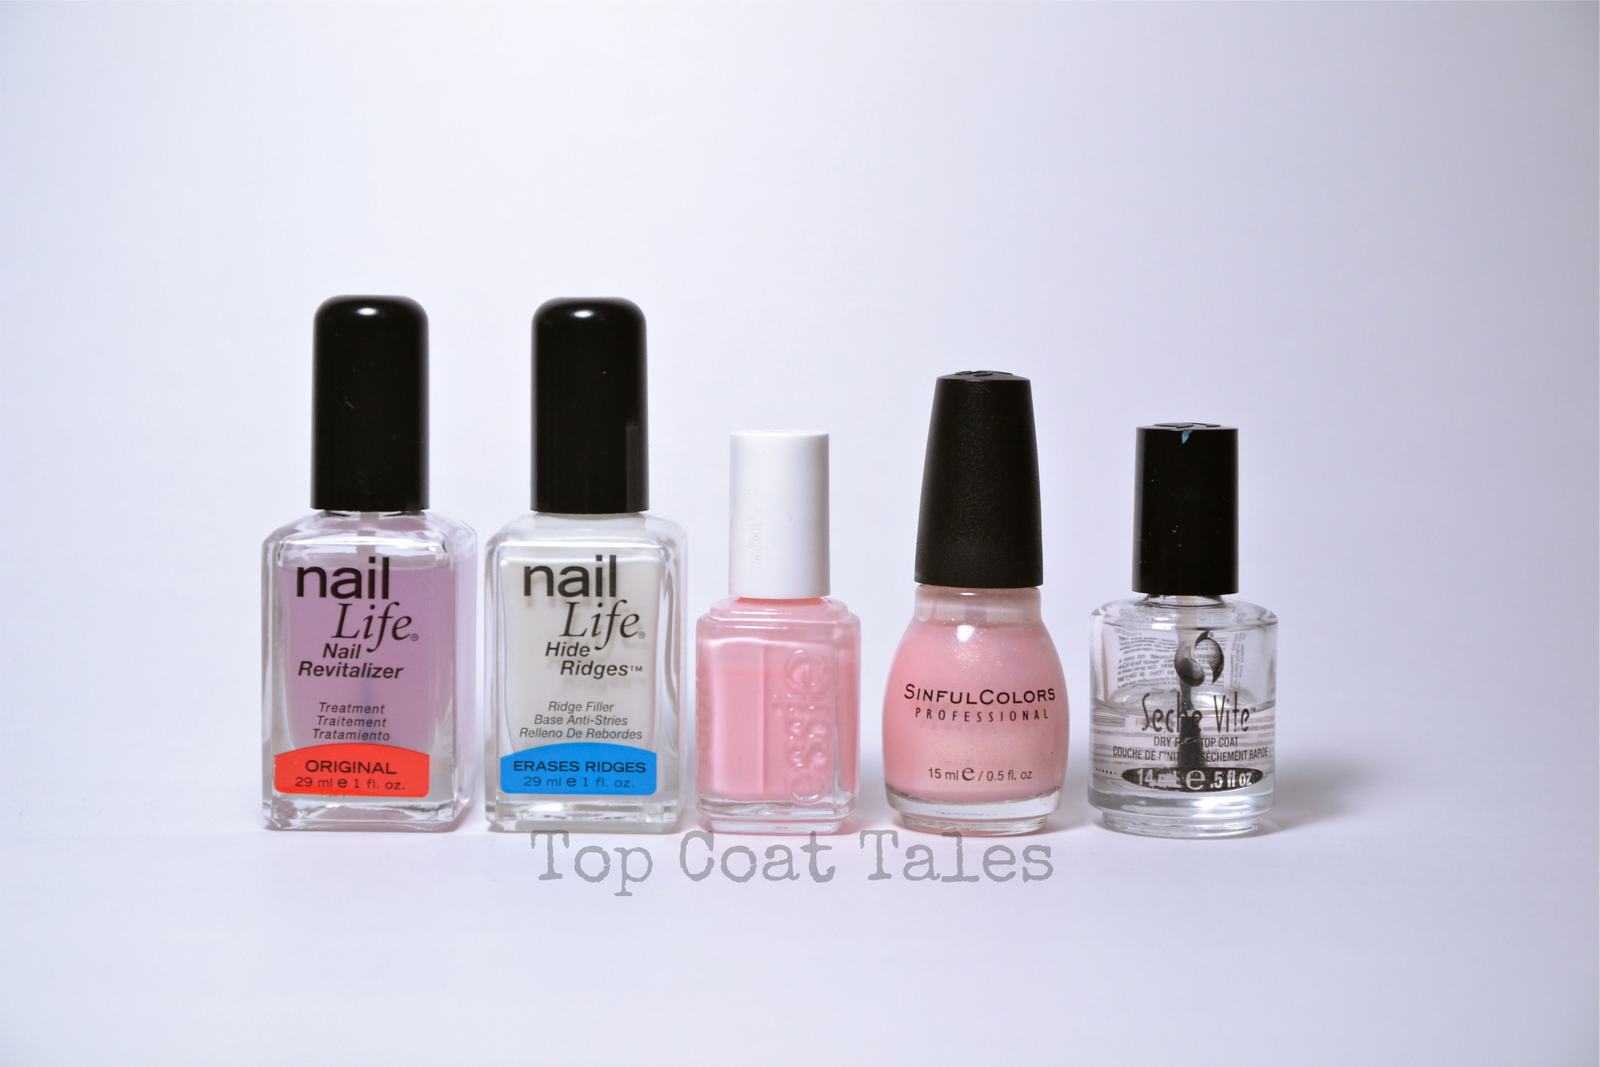 I recently picked up the Nail Life Nail Revitalizer and Nail Life Hide